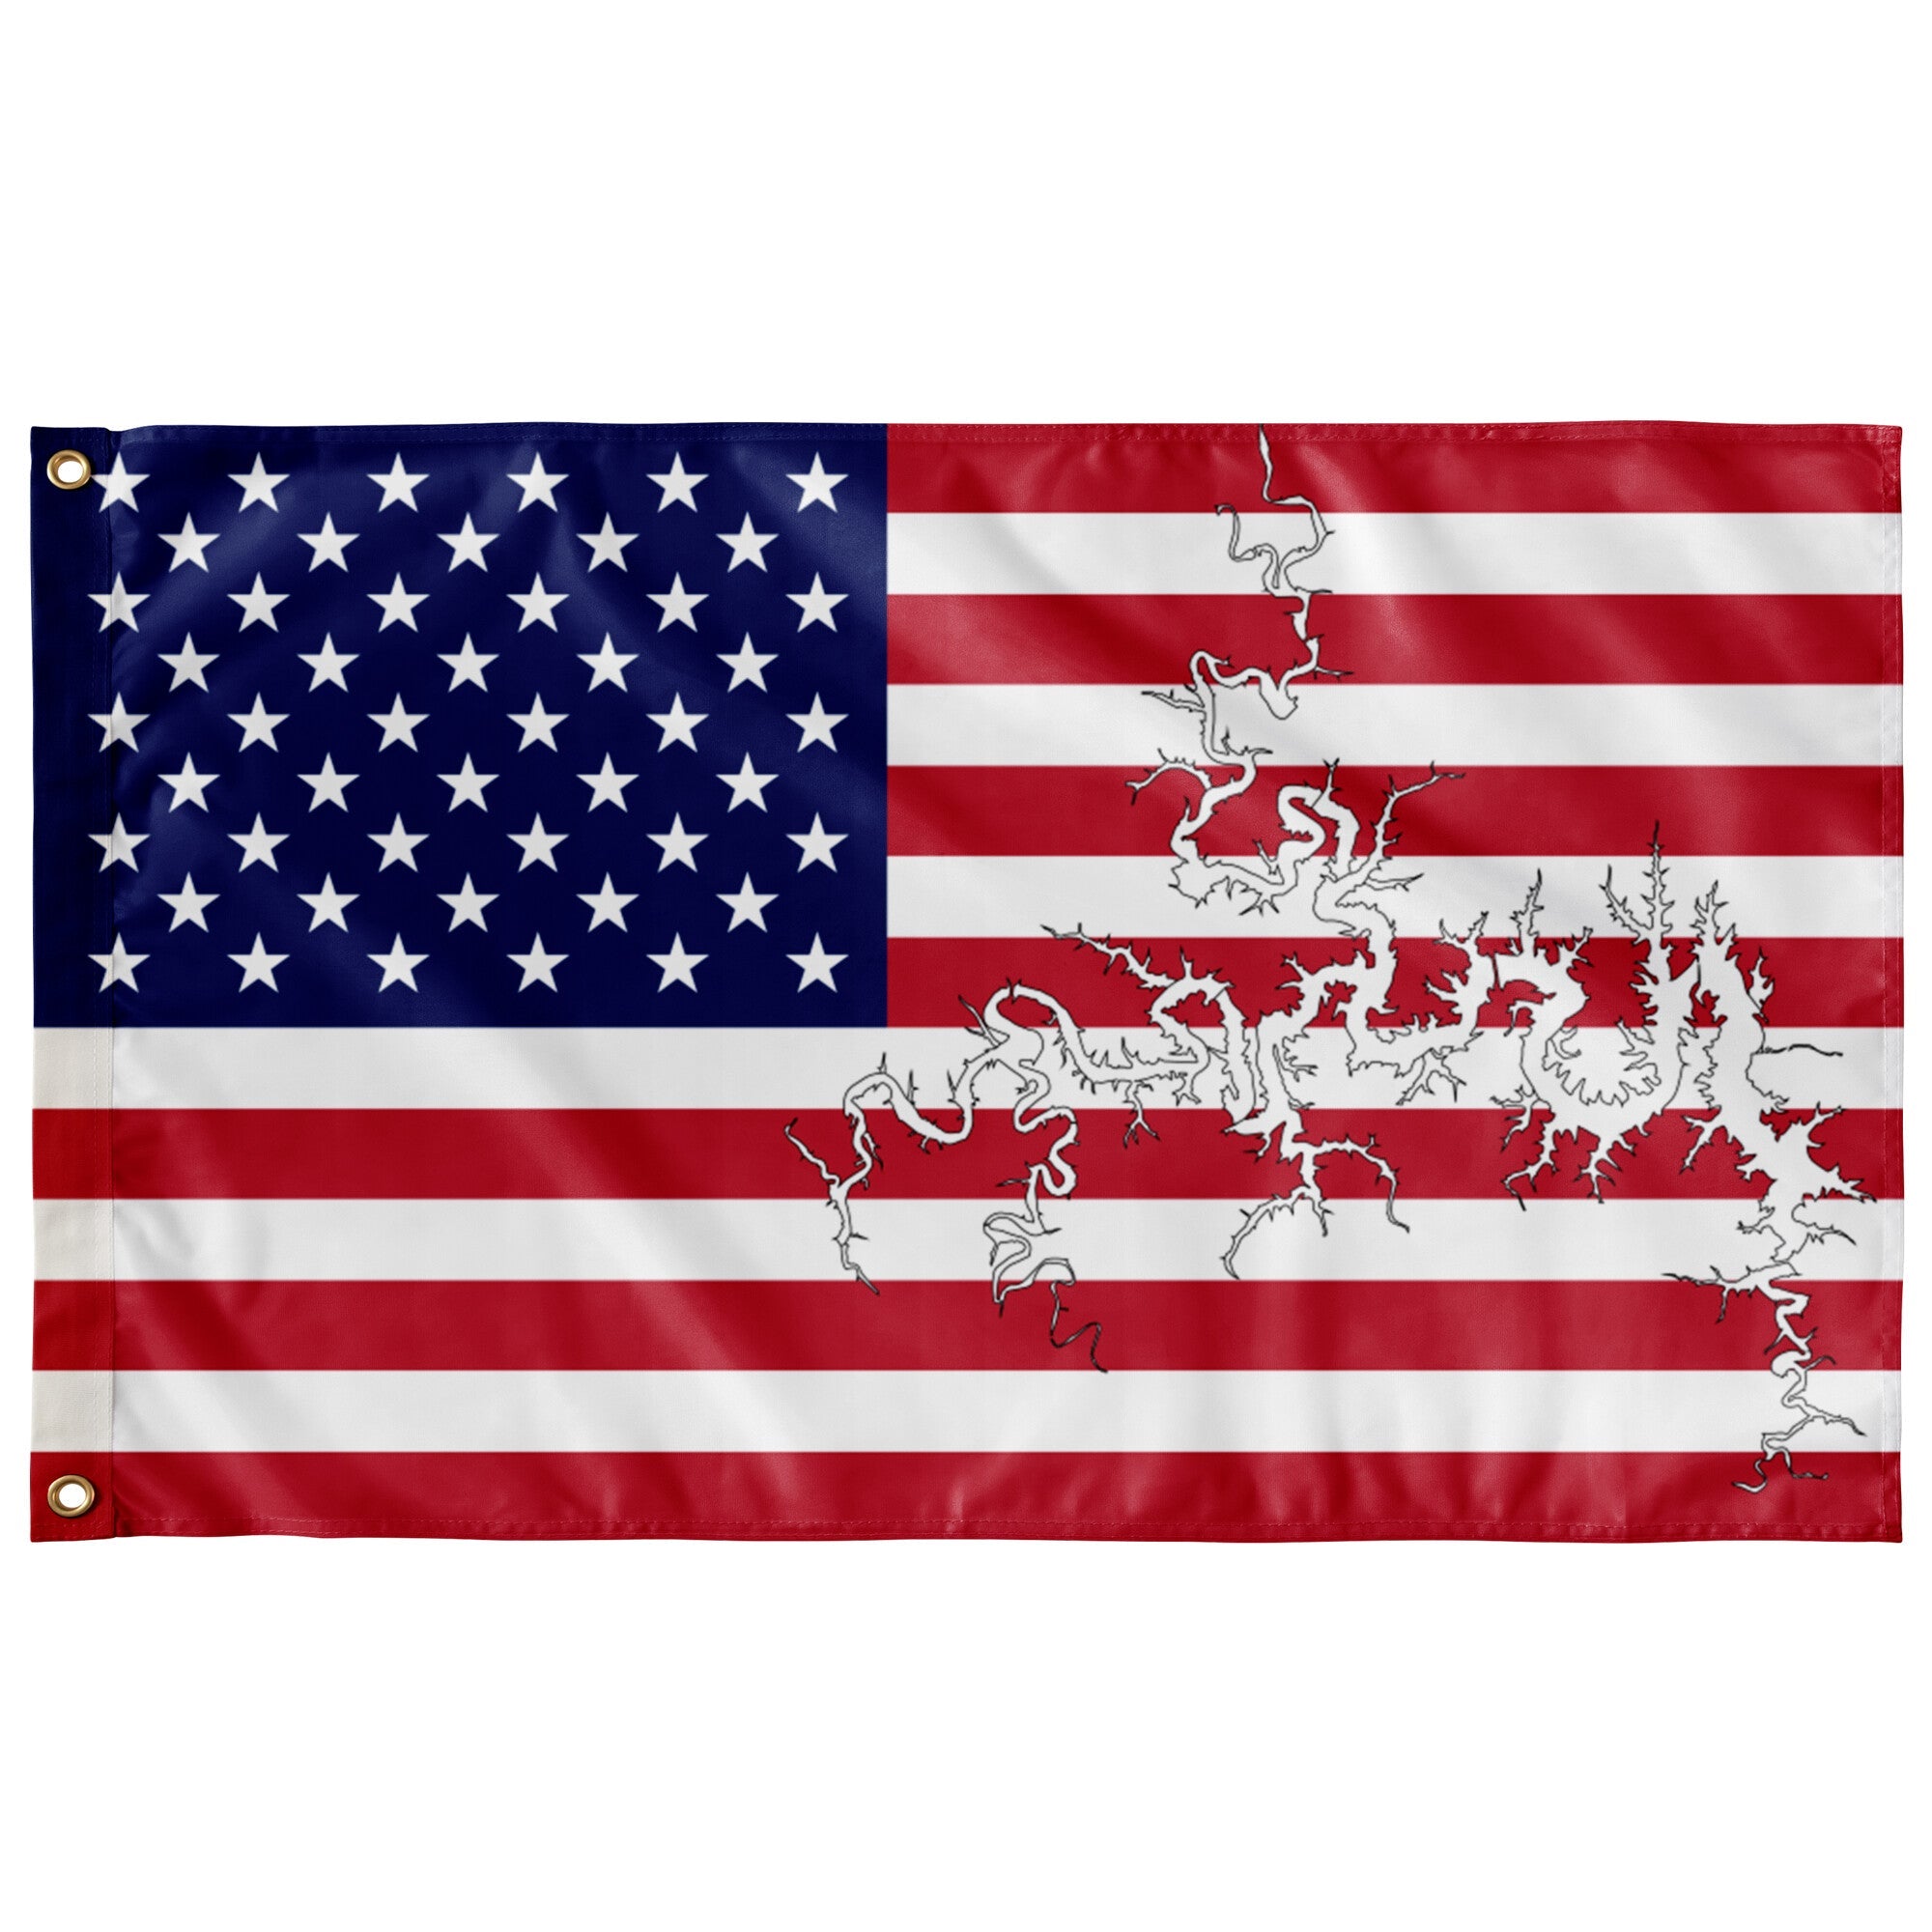 Table Rock Lake Red, White & Blue American Boat Flag Wall Art 